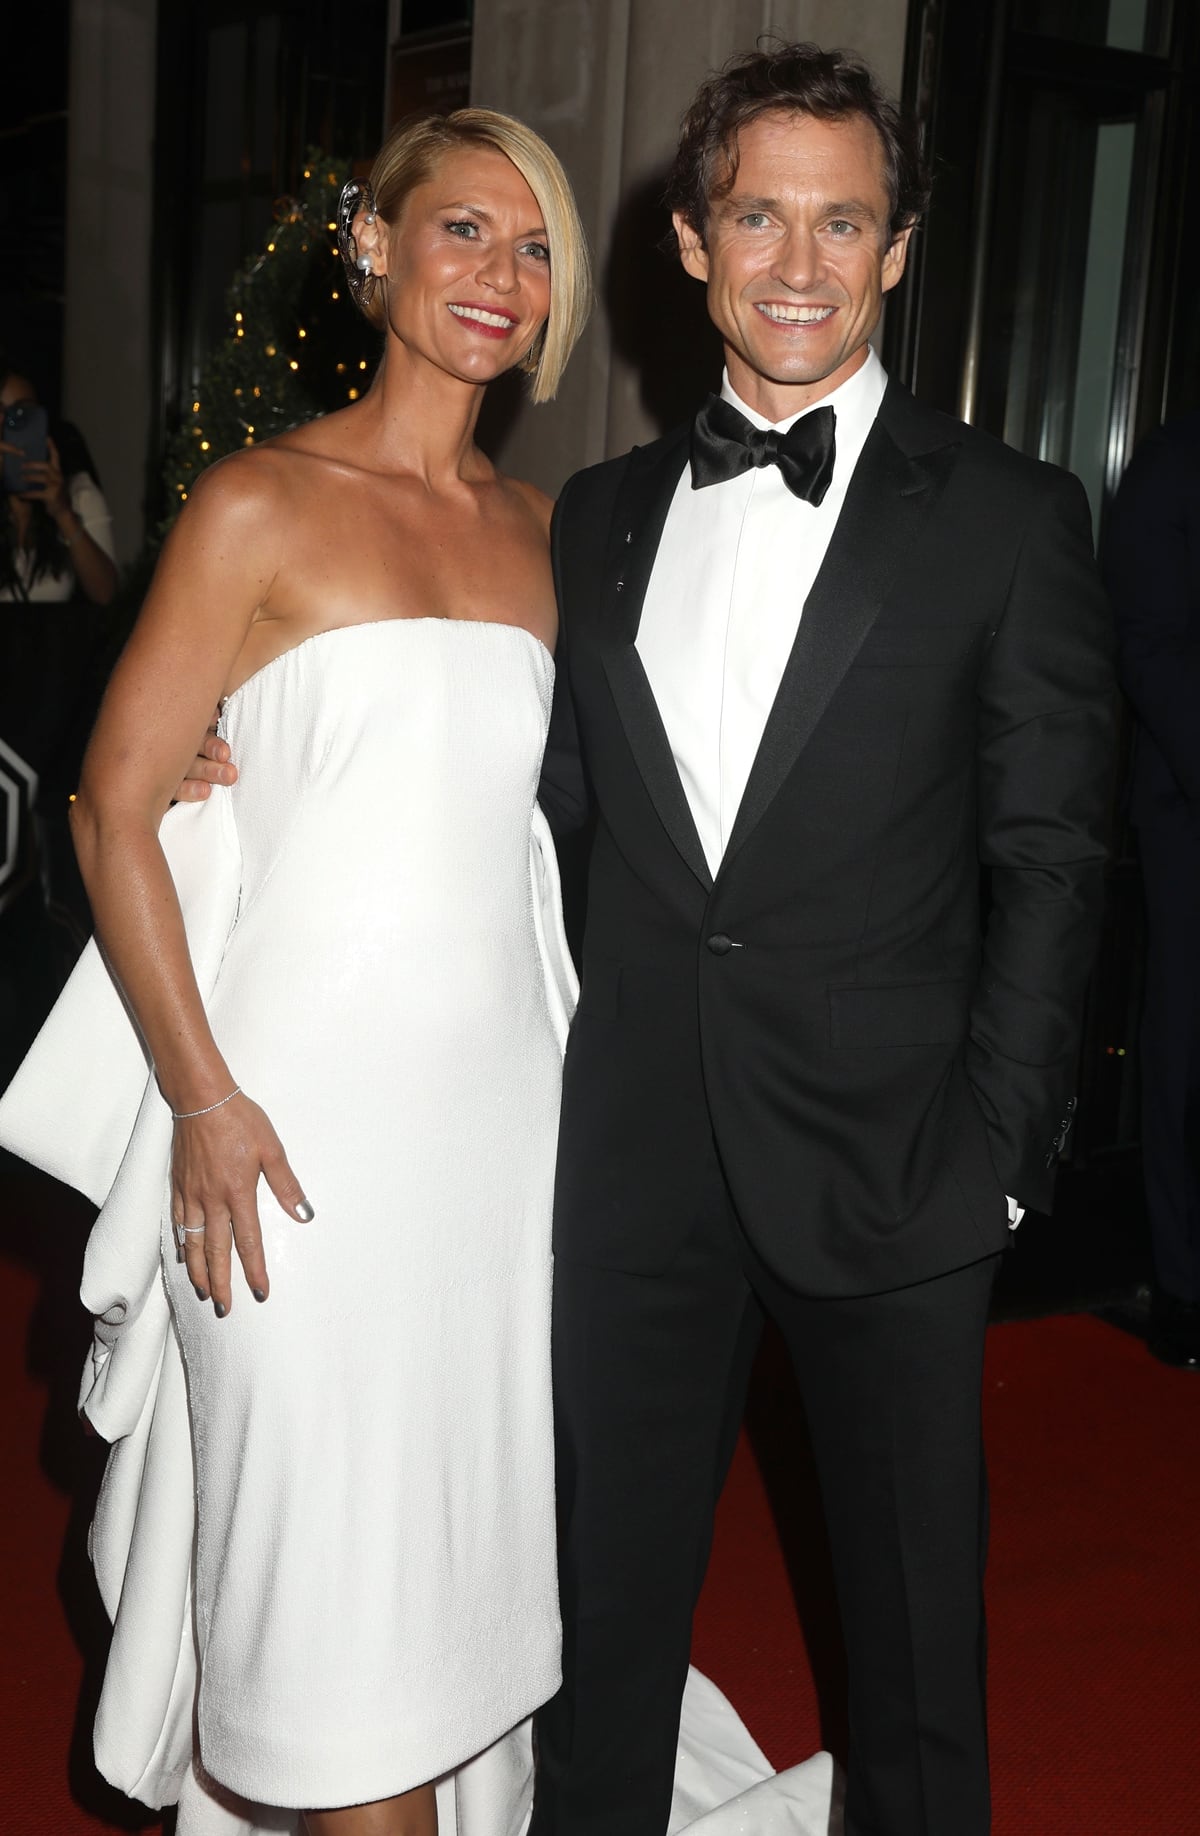 Claire Danes in a Prabal Gurung dress and her husband Hugh Dancy in a Todd Snyder suit